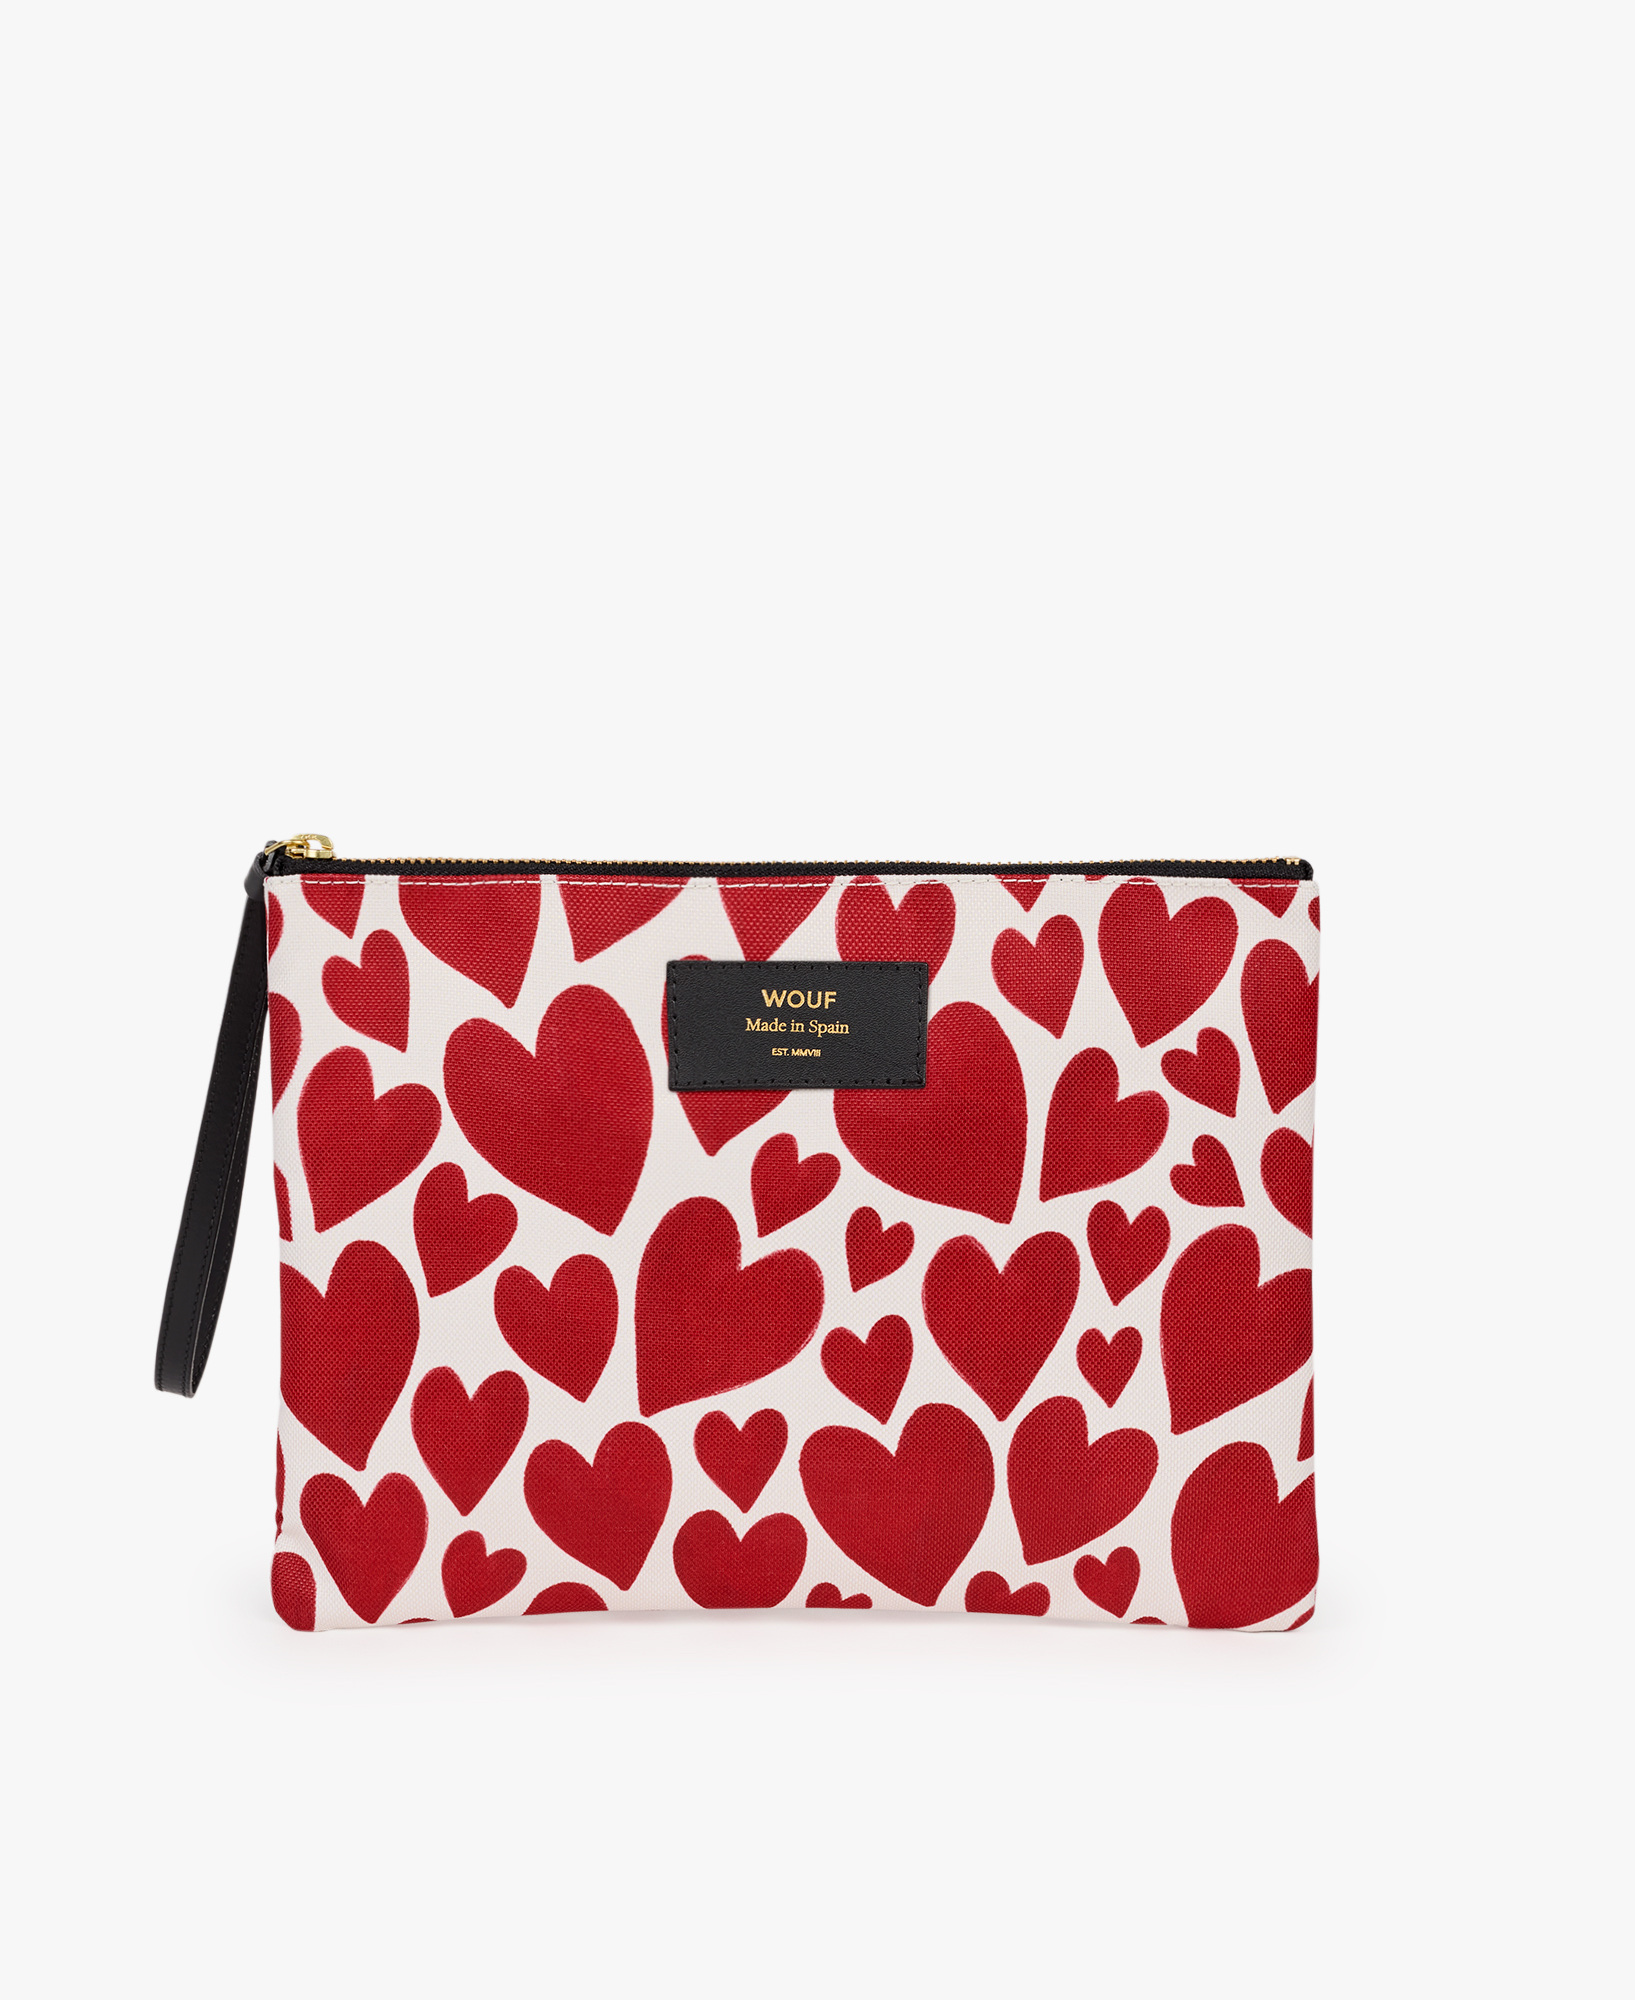 WOUF-XL-Pouch-Amour-Front